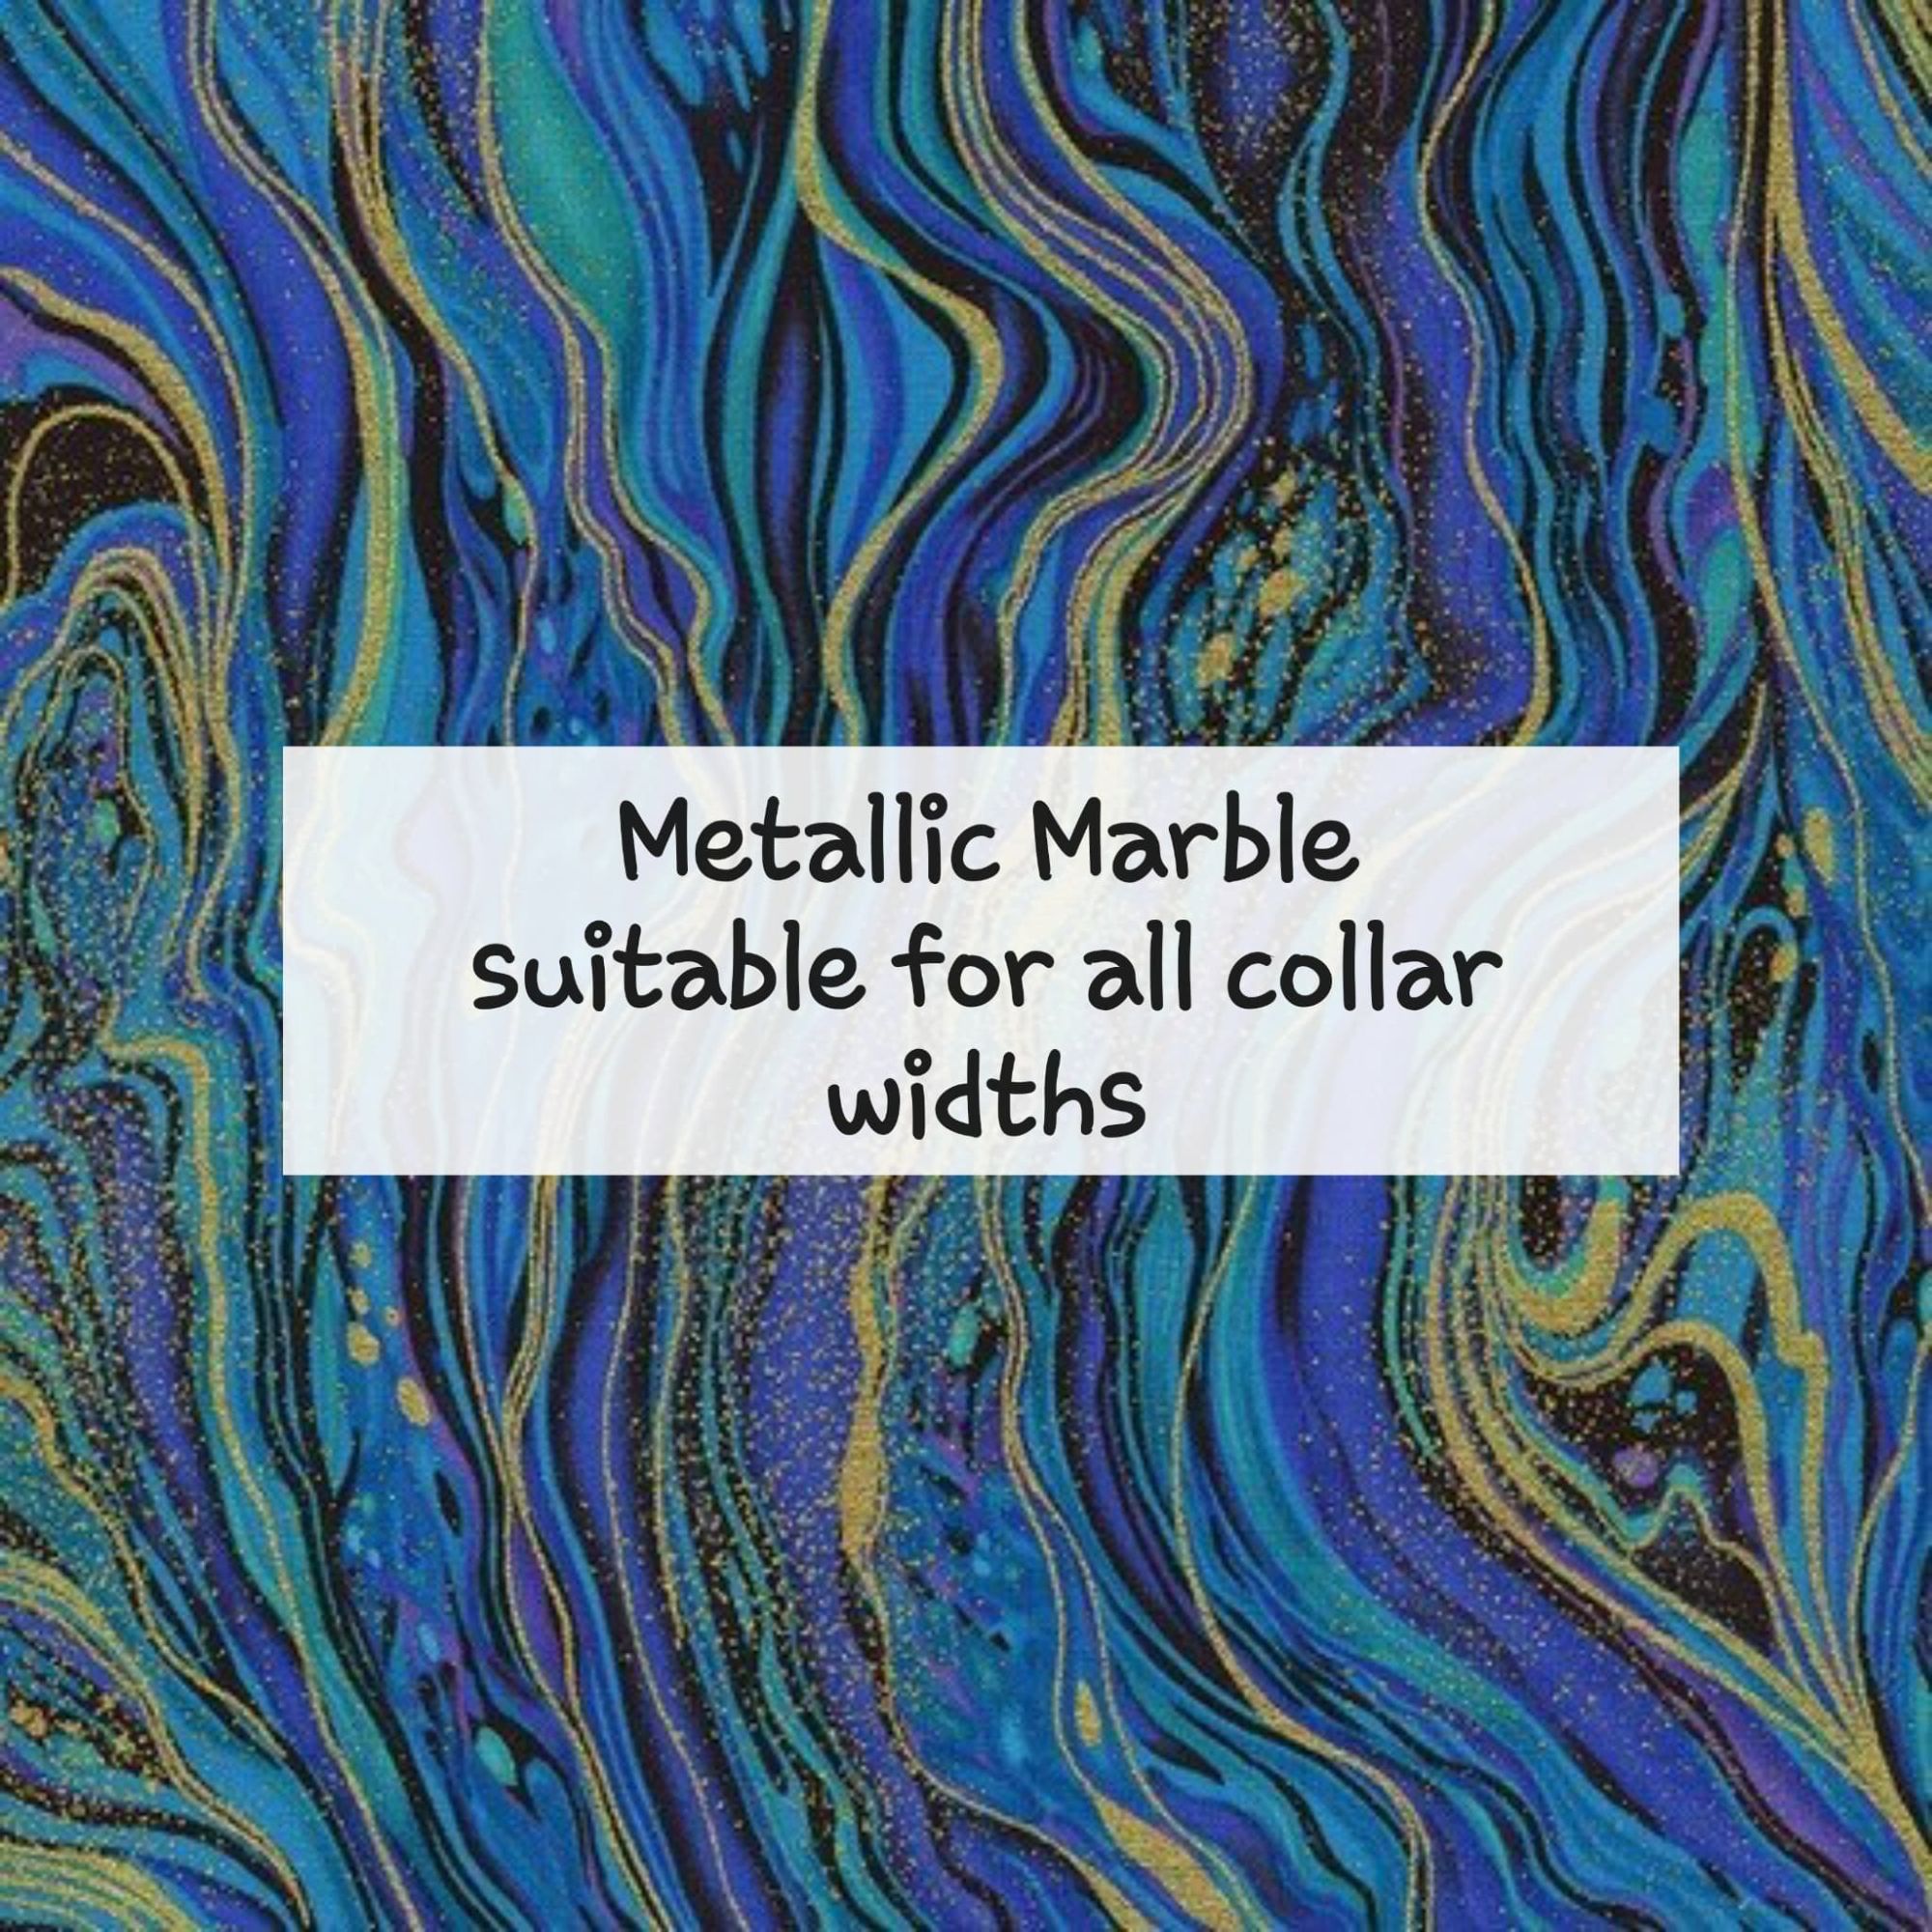 Metallic Marble - Suitable for all collar widths